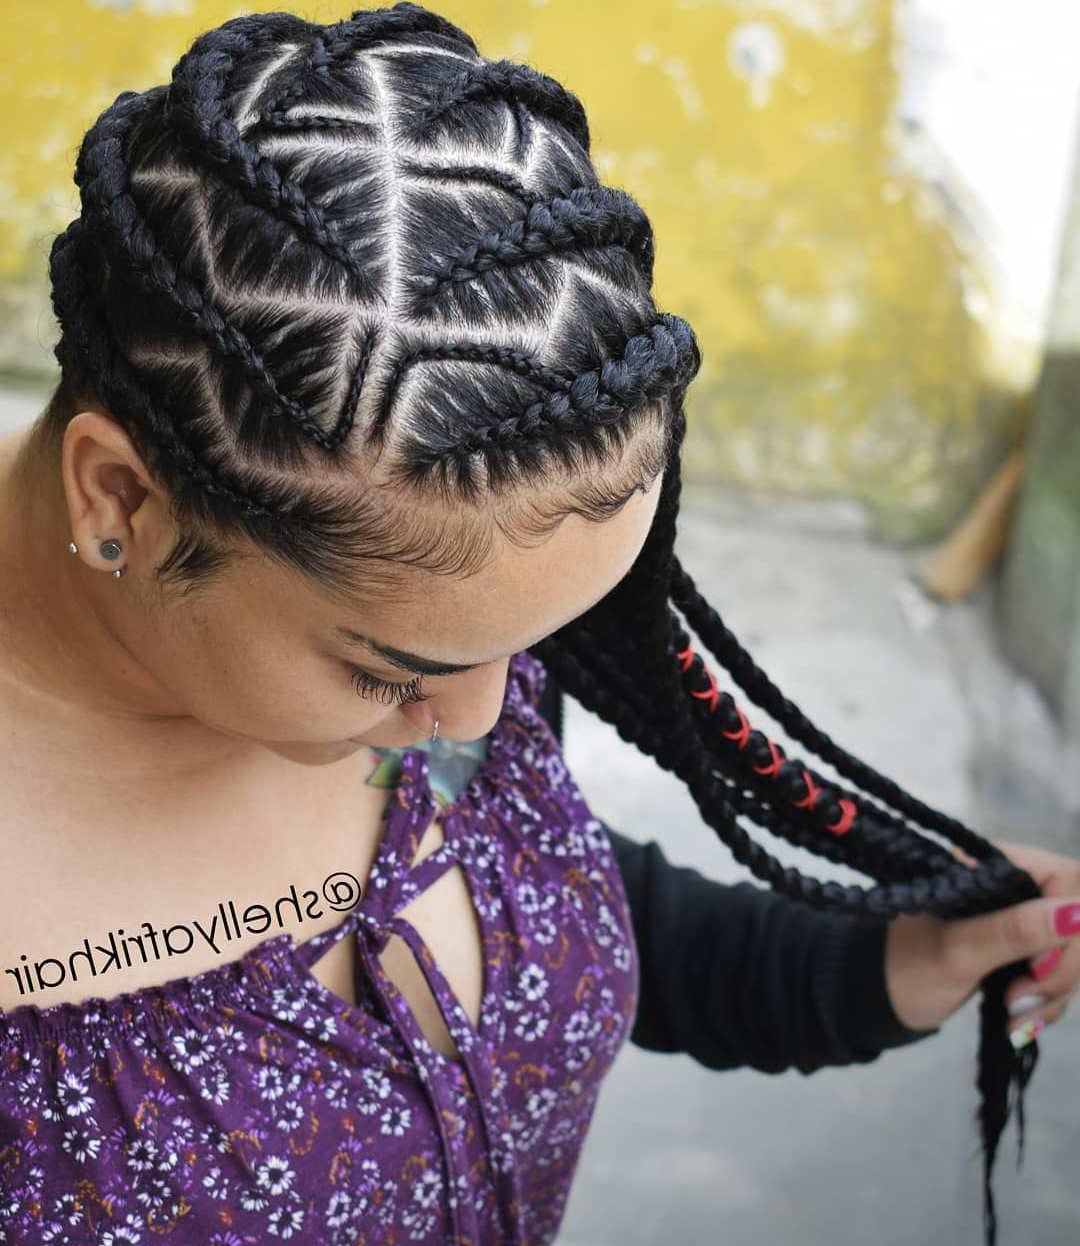 20 Head Turning Lemonade Braid Styles For All Ages Within Fashionable Ponytail Braid Hairstyles With Thin And Thick Cornrows (View 3 of 20)